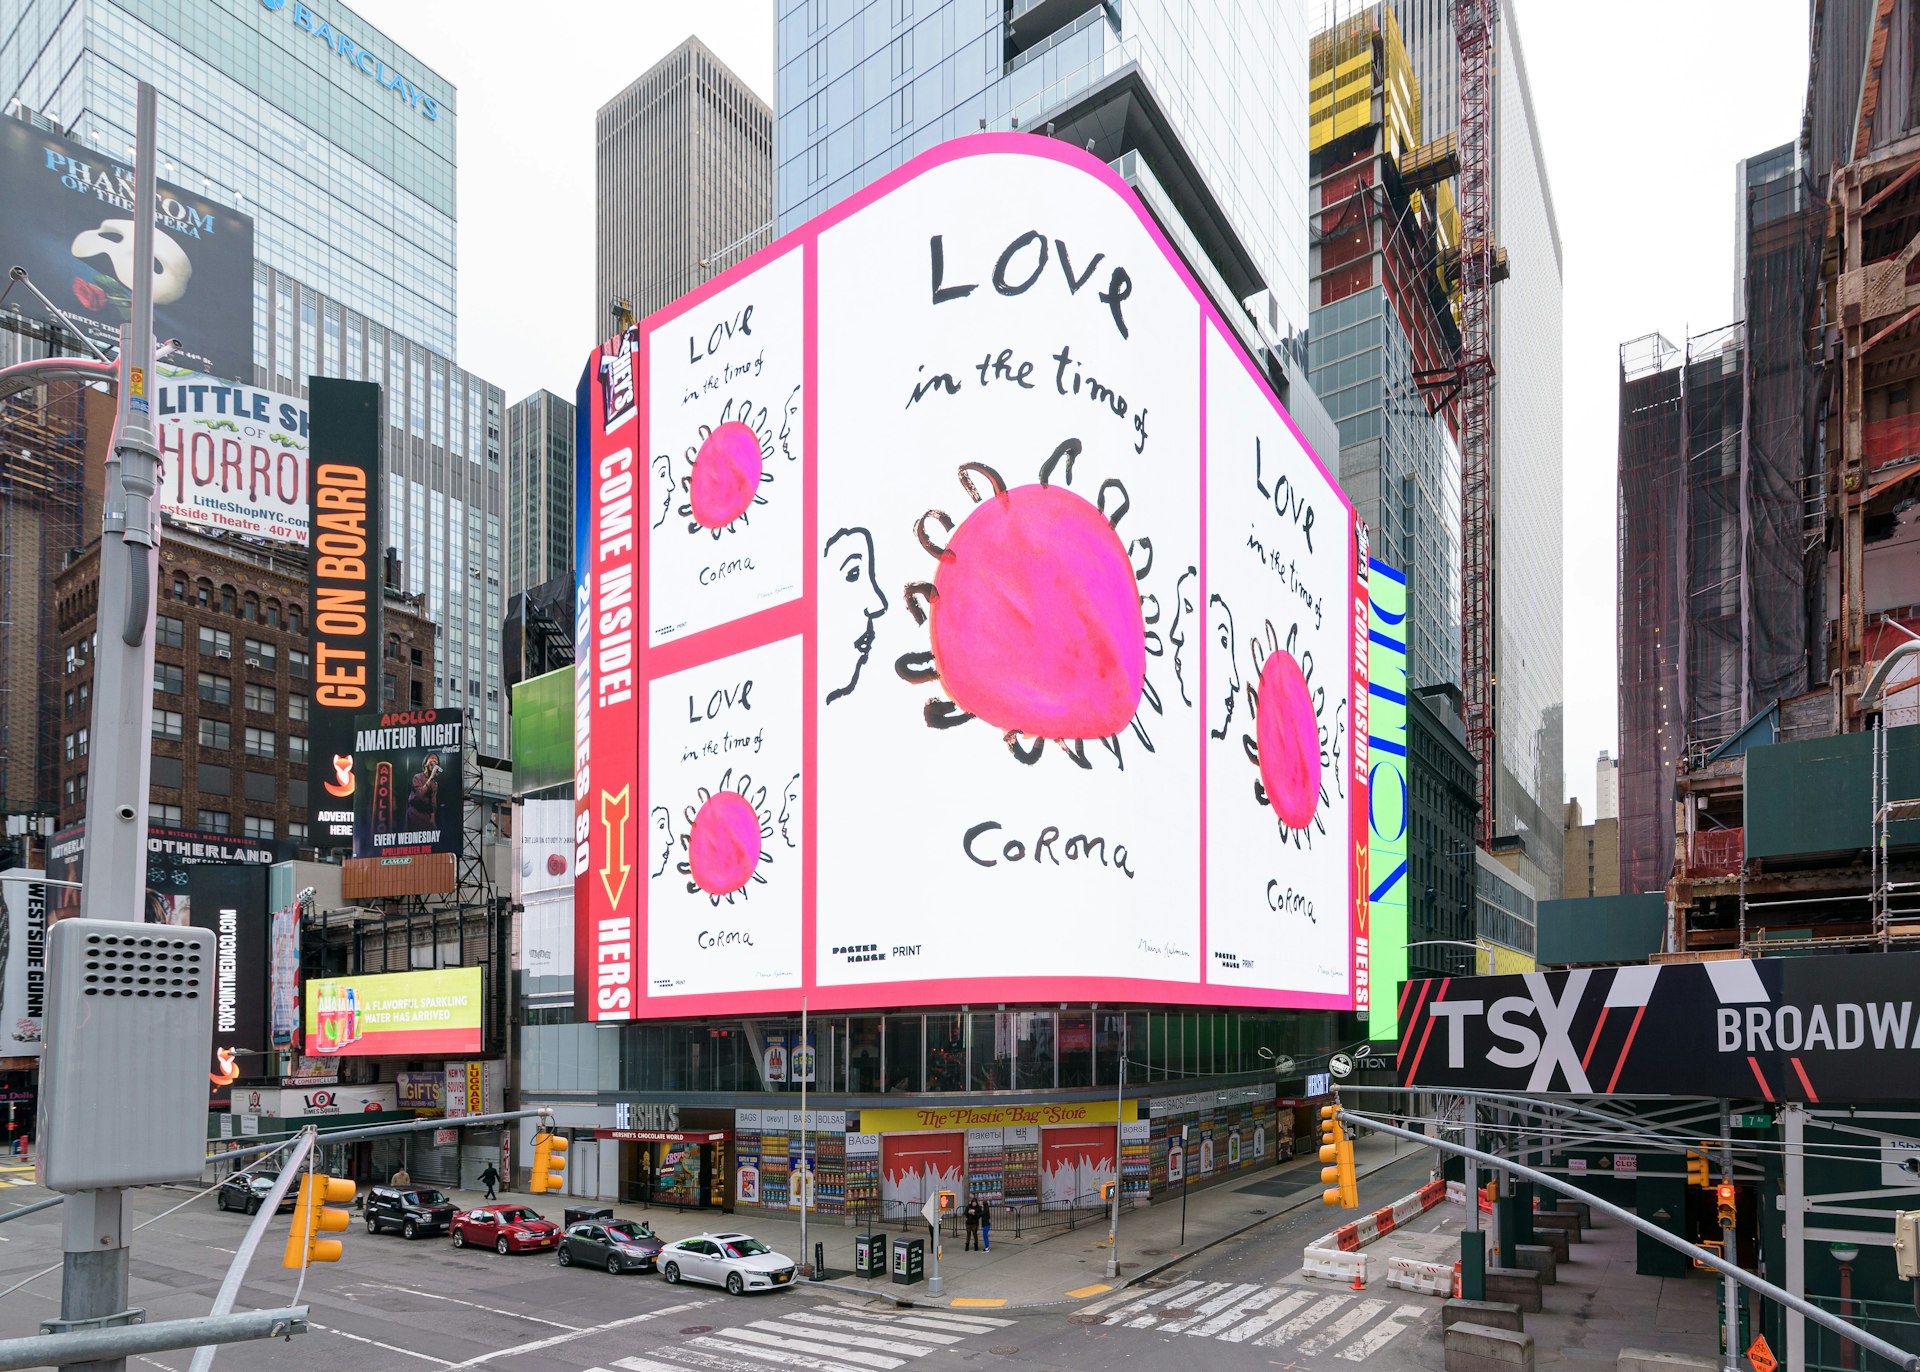 Love in the Time of Corona poster in Times Square. PSA by Maira Kalman, photo by Ian Douglas